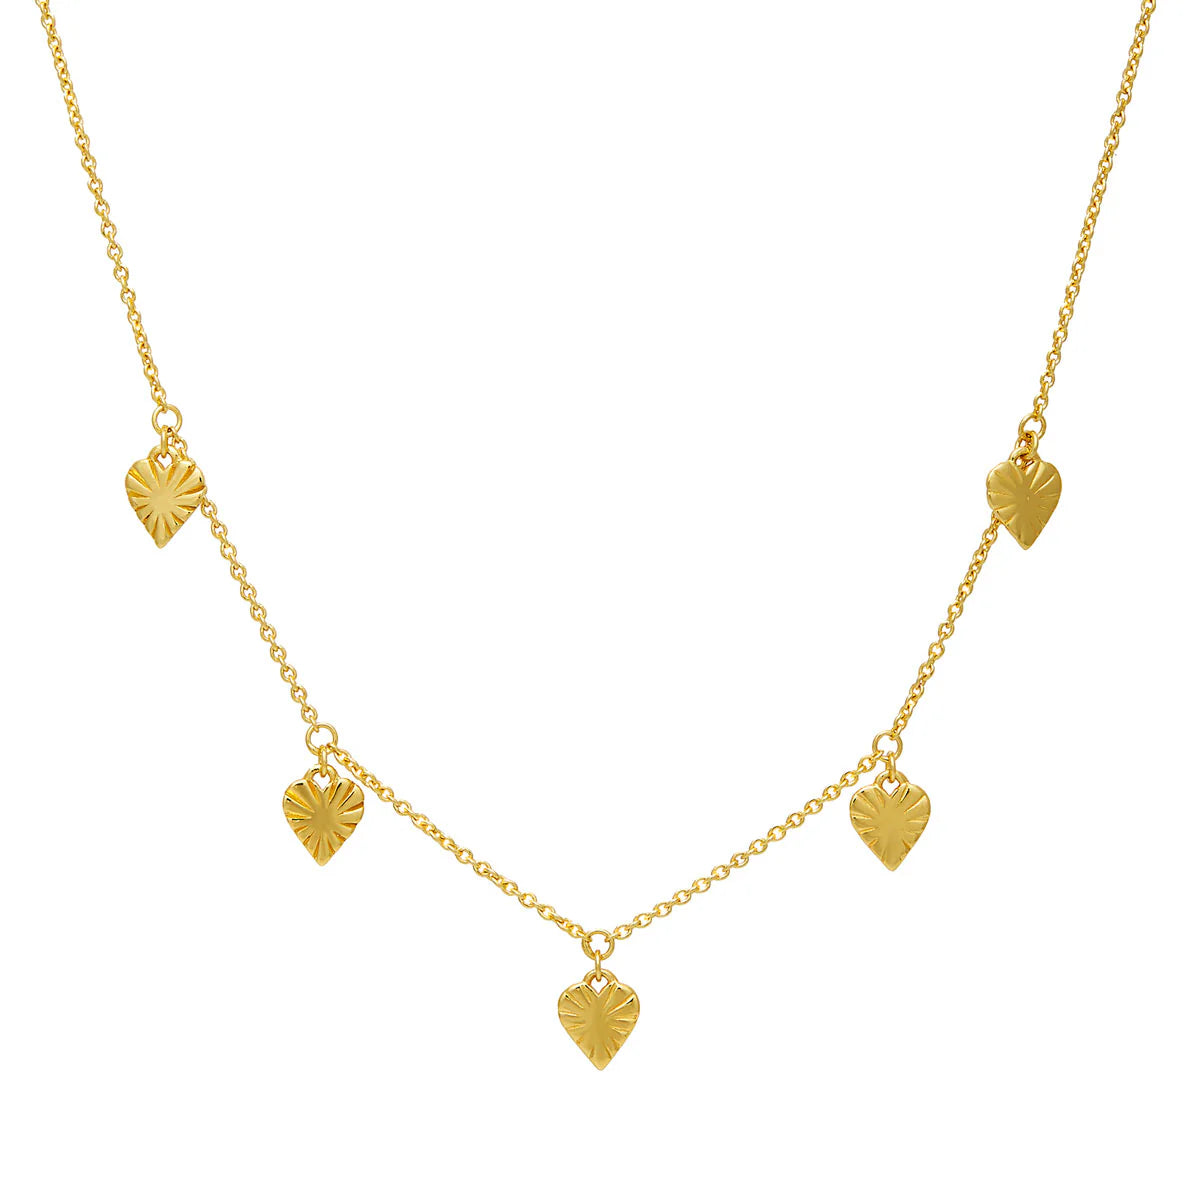 N020G - Sweetheart Drop Necklace Gold